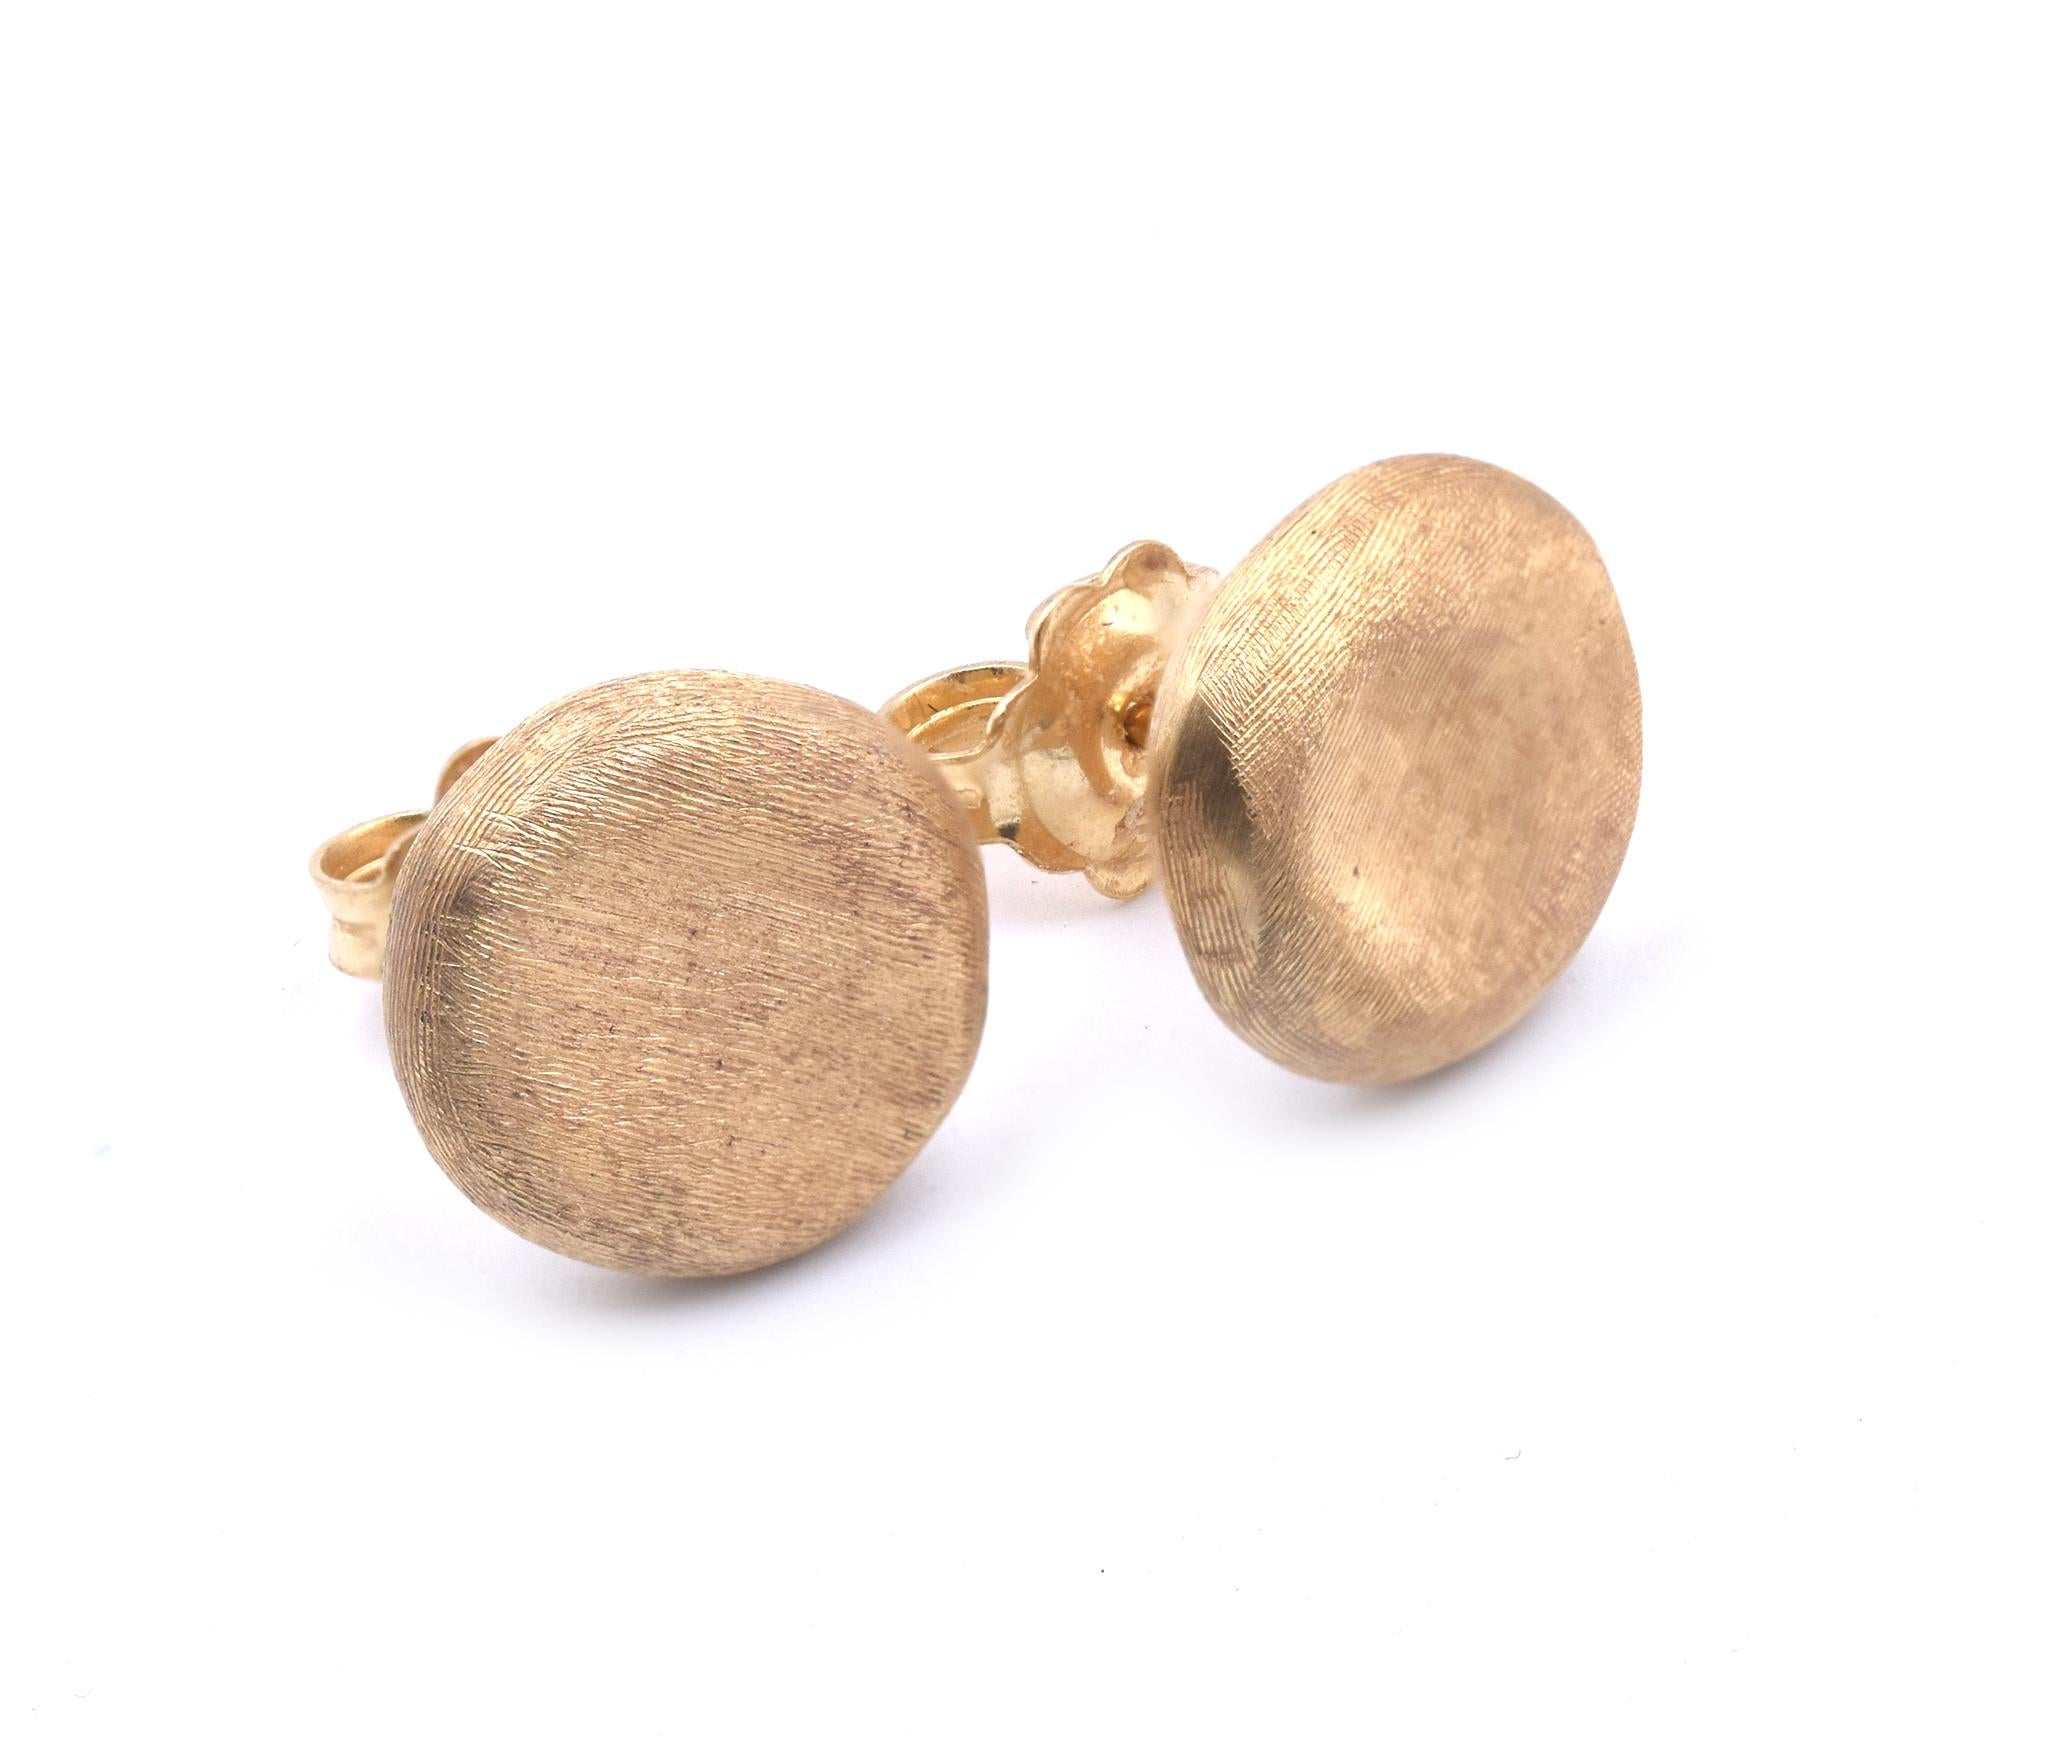 Designer: Marco Bicego
Material: 18K yellow gold
Weight: 2.59 grams
Length: earrings measure 11.5 X  11.25MM
